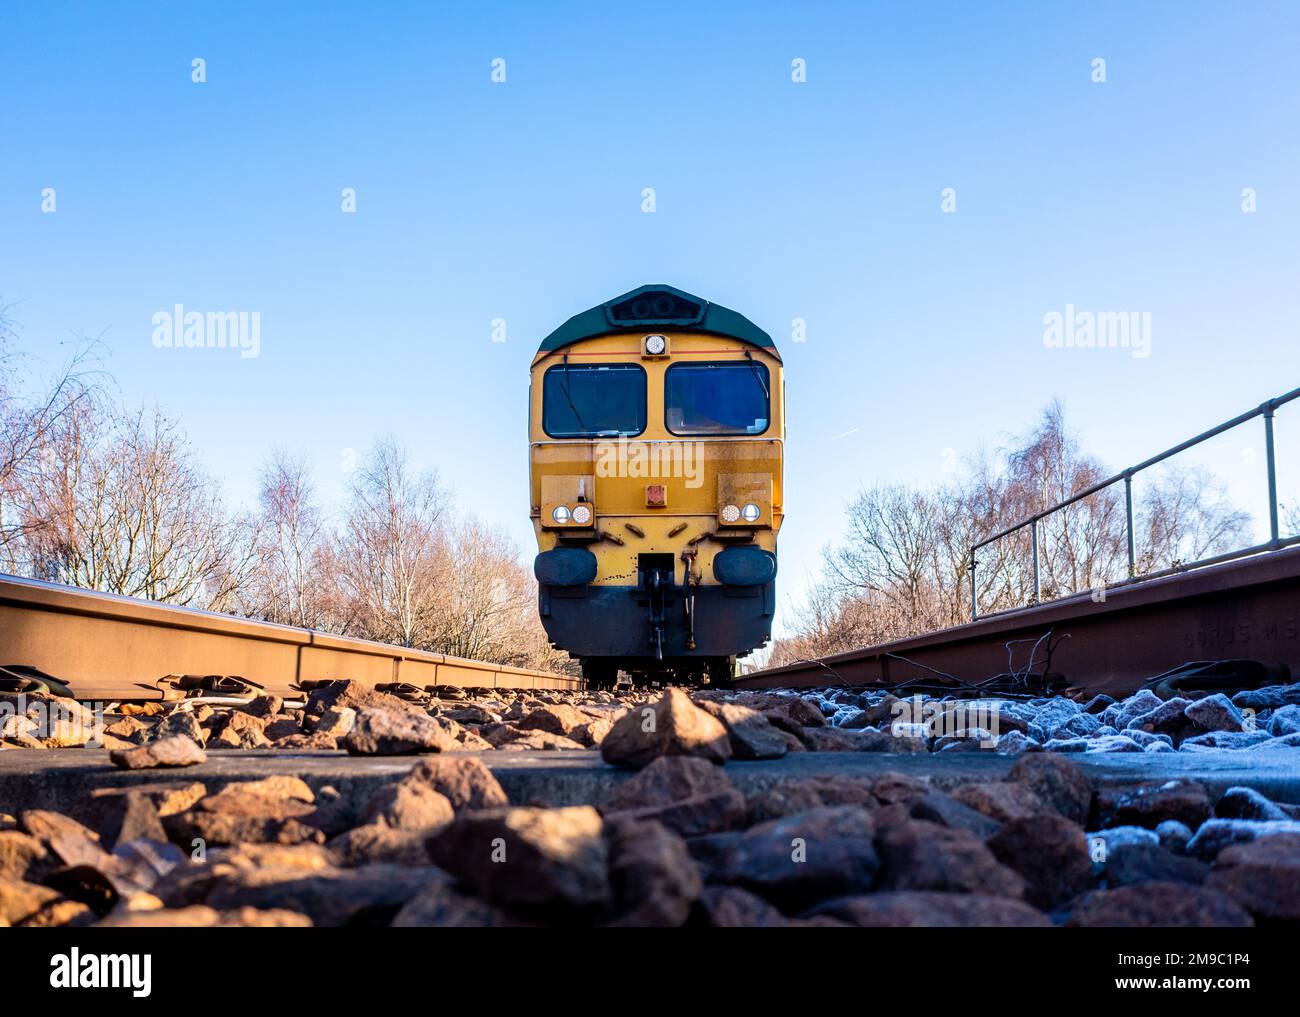 A point of view image of the front of a freight locomotive moving towards a person on the railway line in a suicide or occupational safety concept Stock Photo